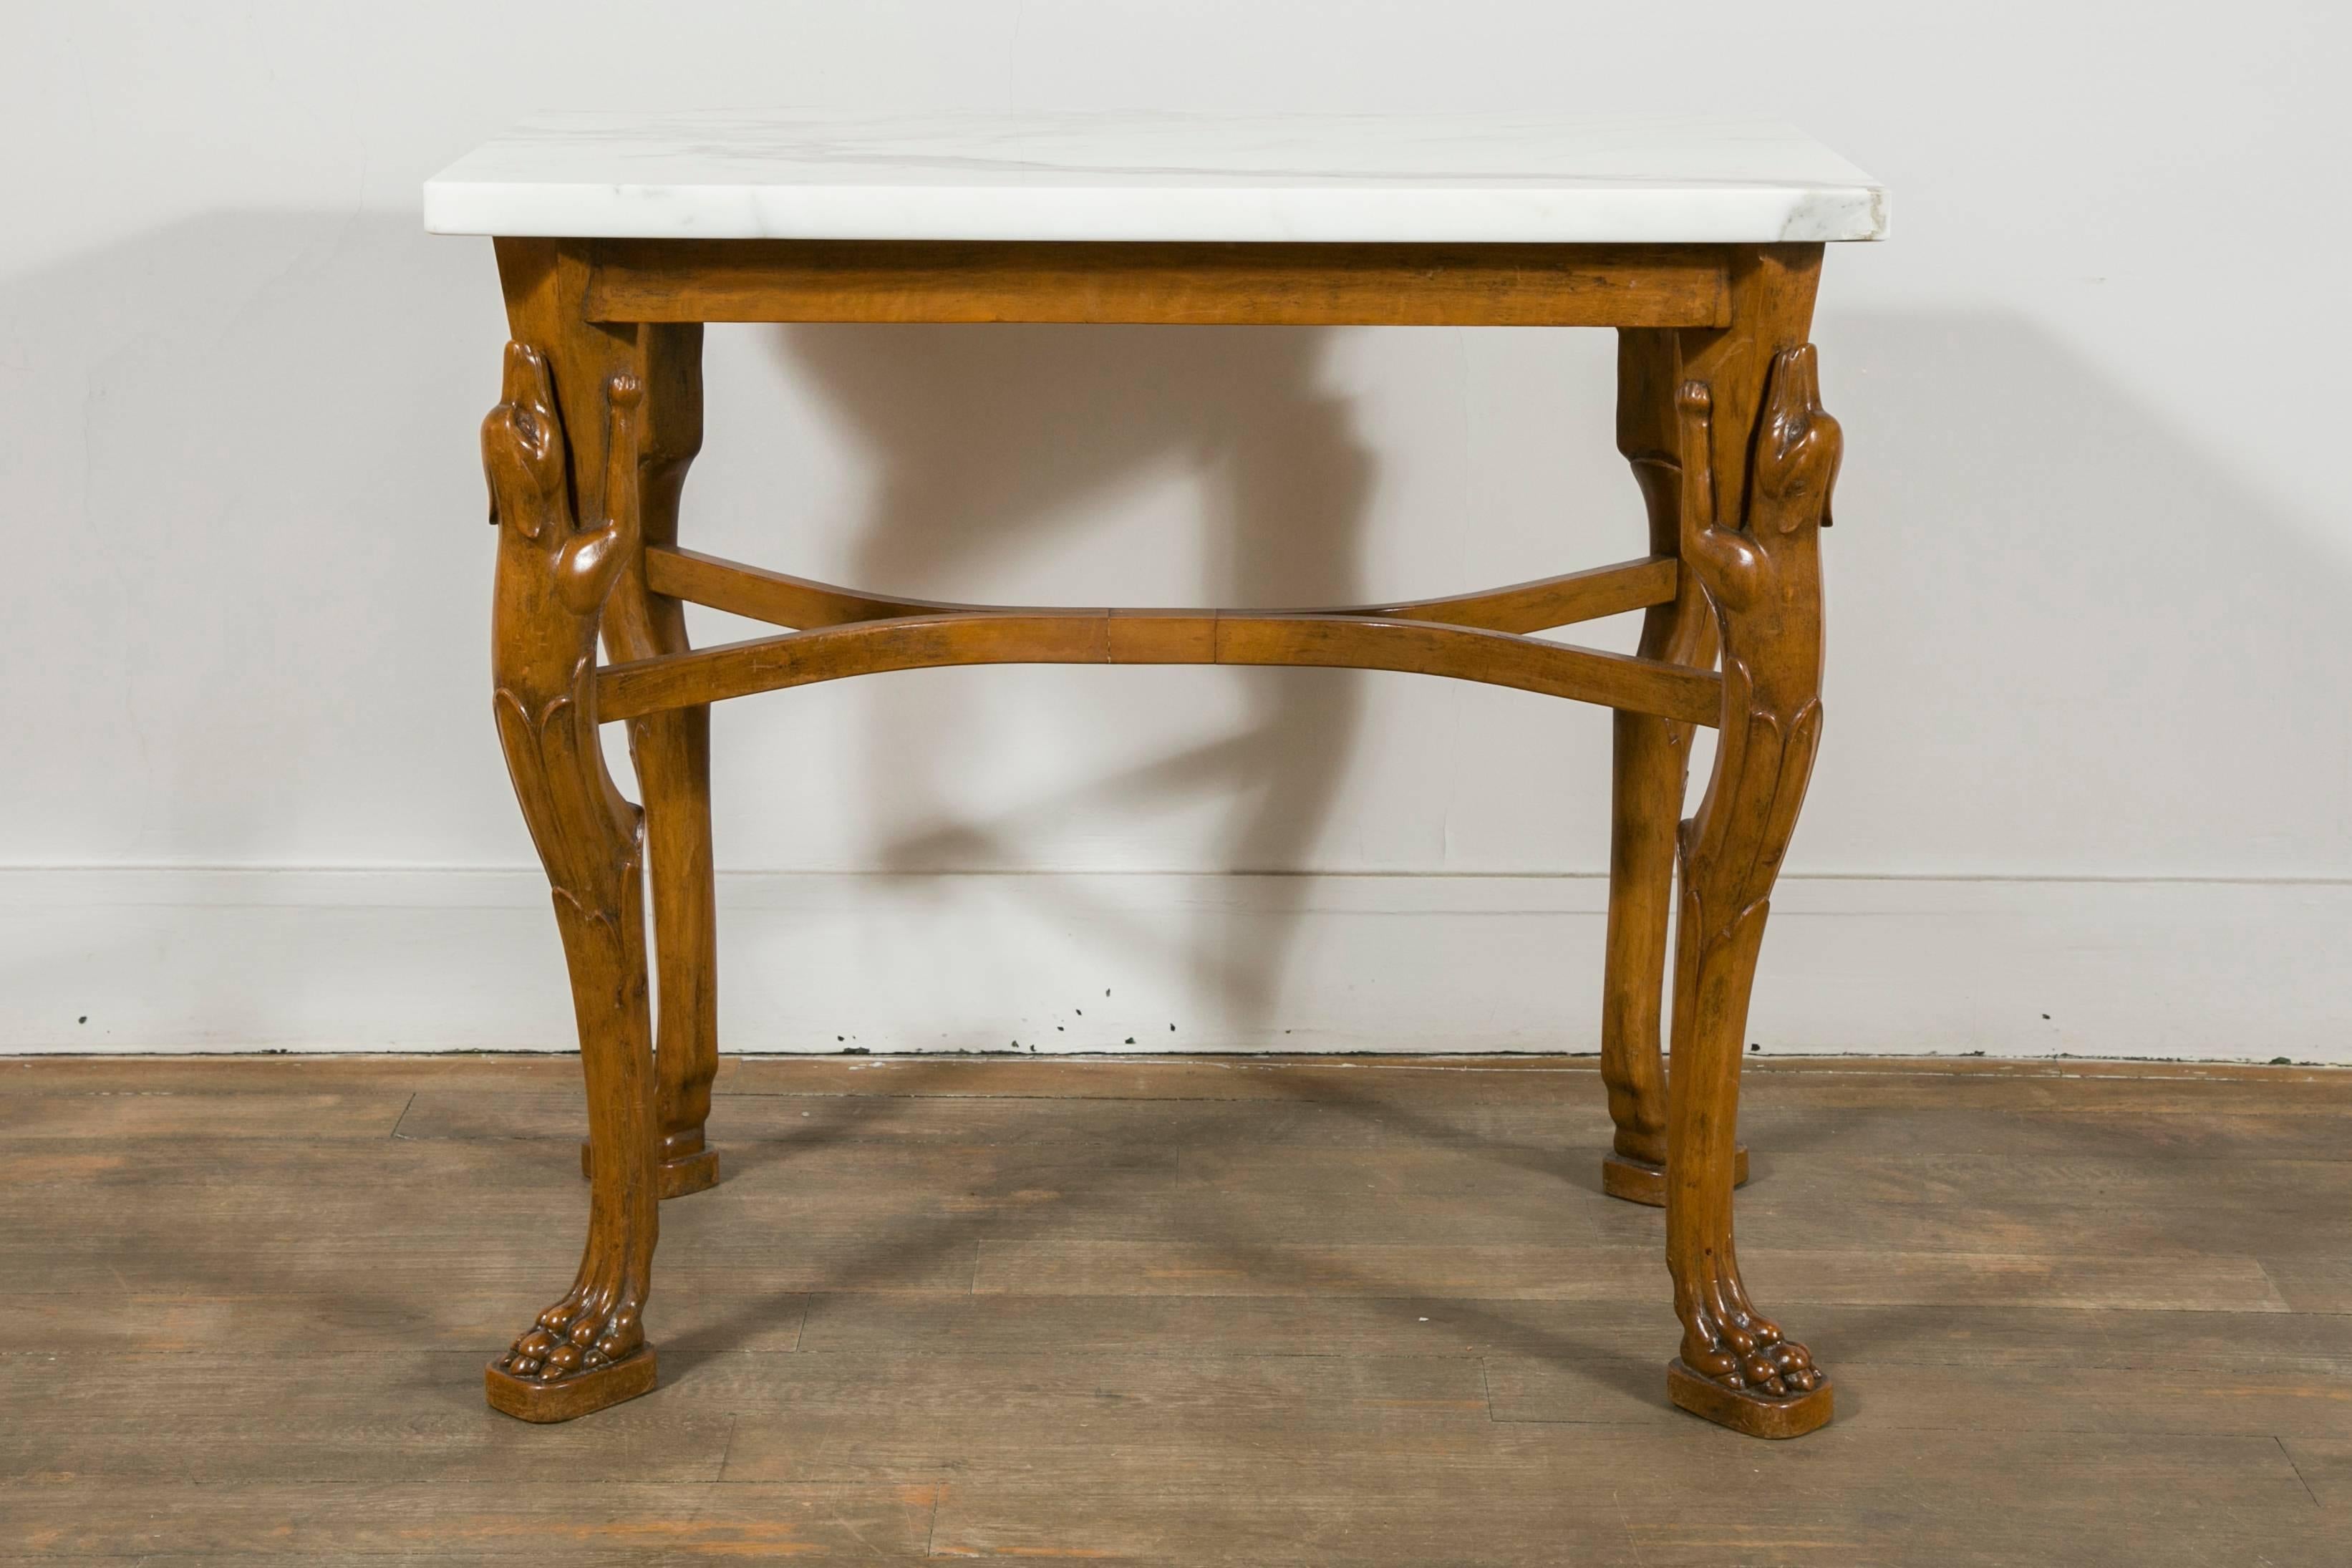 An rare set consisting of :
- One fruitwood table, with Calacatta marble top
The table can be used as a console, desk or occasional table
The design of this table is directly inspired by a claw-footed bronze table found in Pompeii, now in the